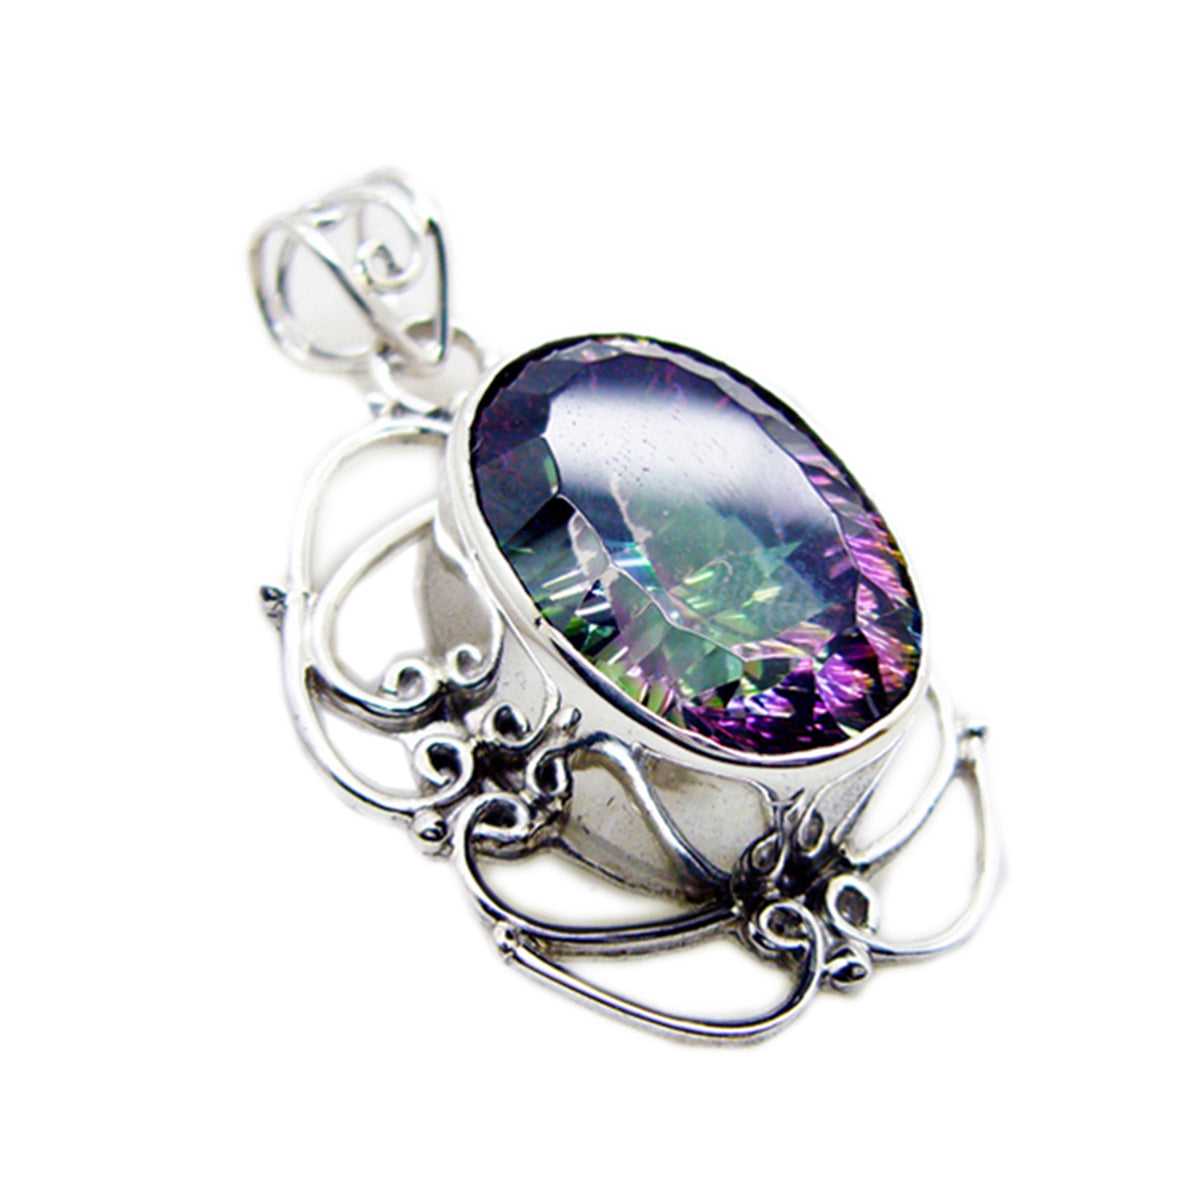 Riyo Beddable Gems Oval Faceted Multi Color Mystic Quartz Solid Silver Pendant Gift For Anniversary